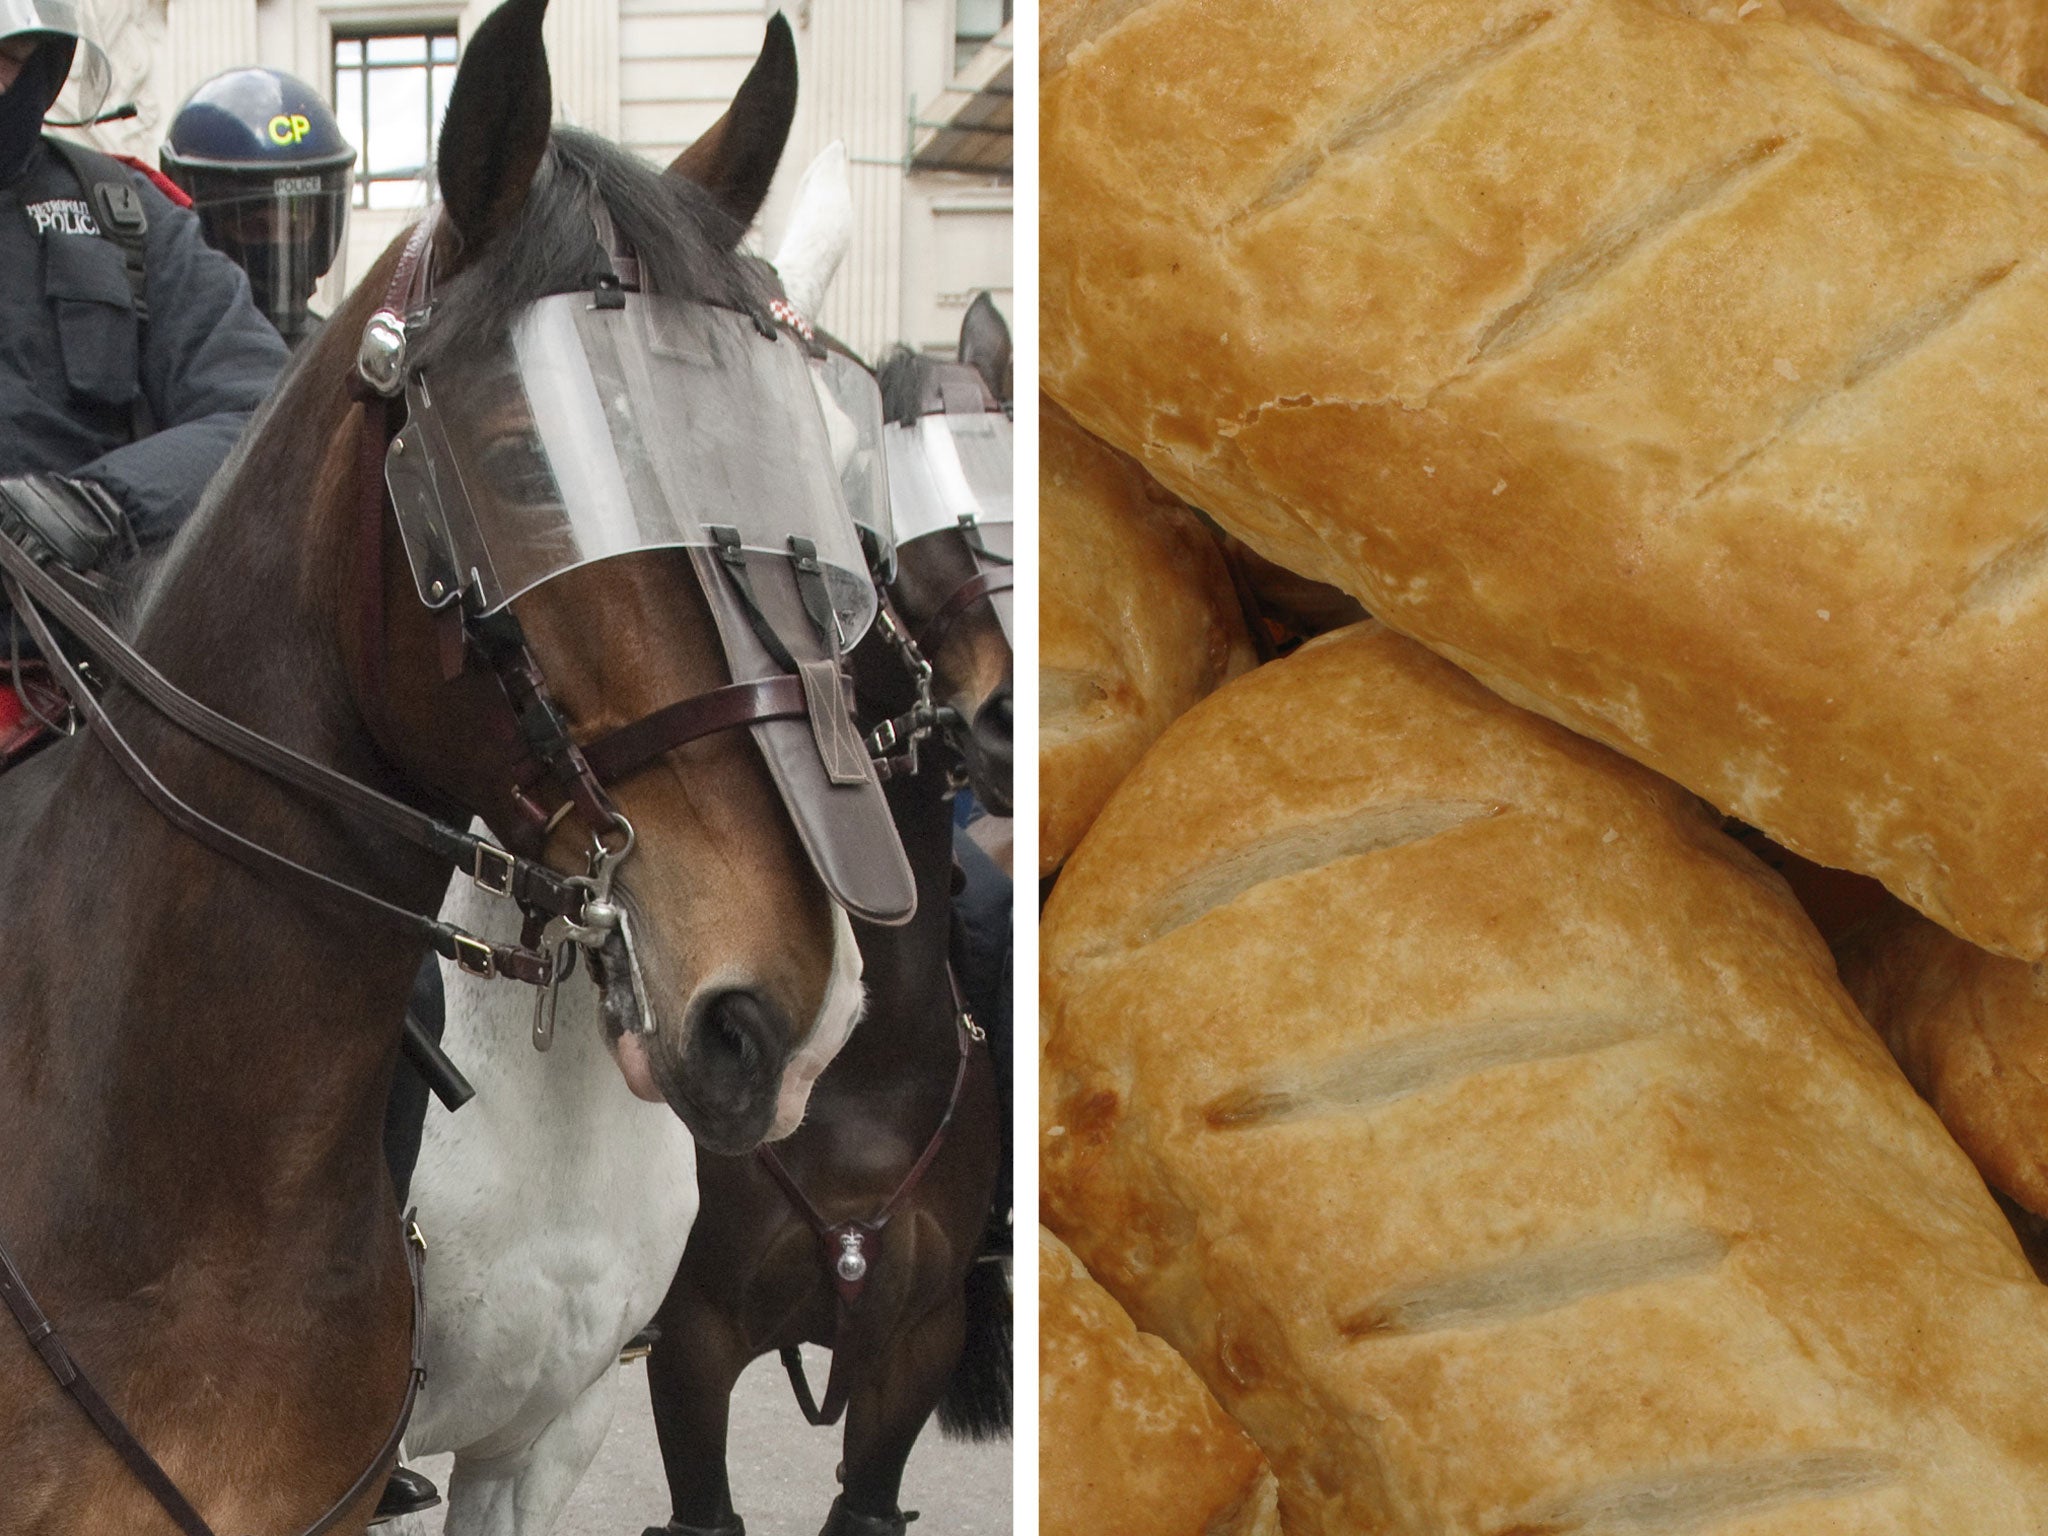 Francis Kelly, was arrested for attempting to share the pastry with the animal because police didn’t want the horse to eat it